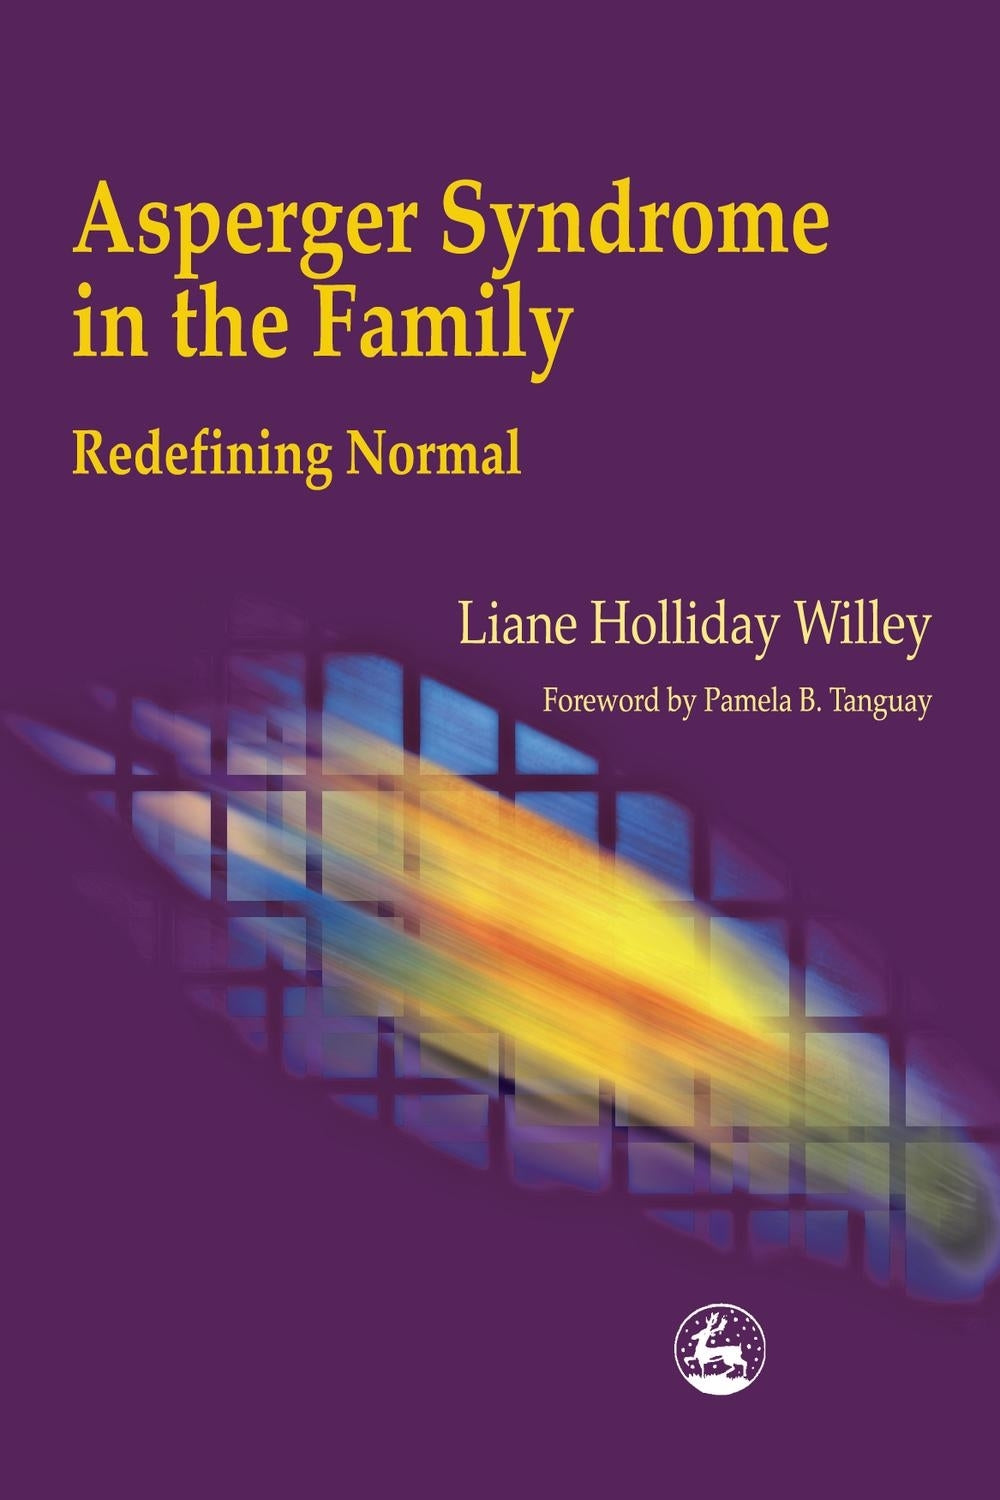 Asperger Syndrome in the Family by Pamela Tanguay, Liane Holliday Willey